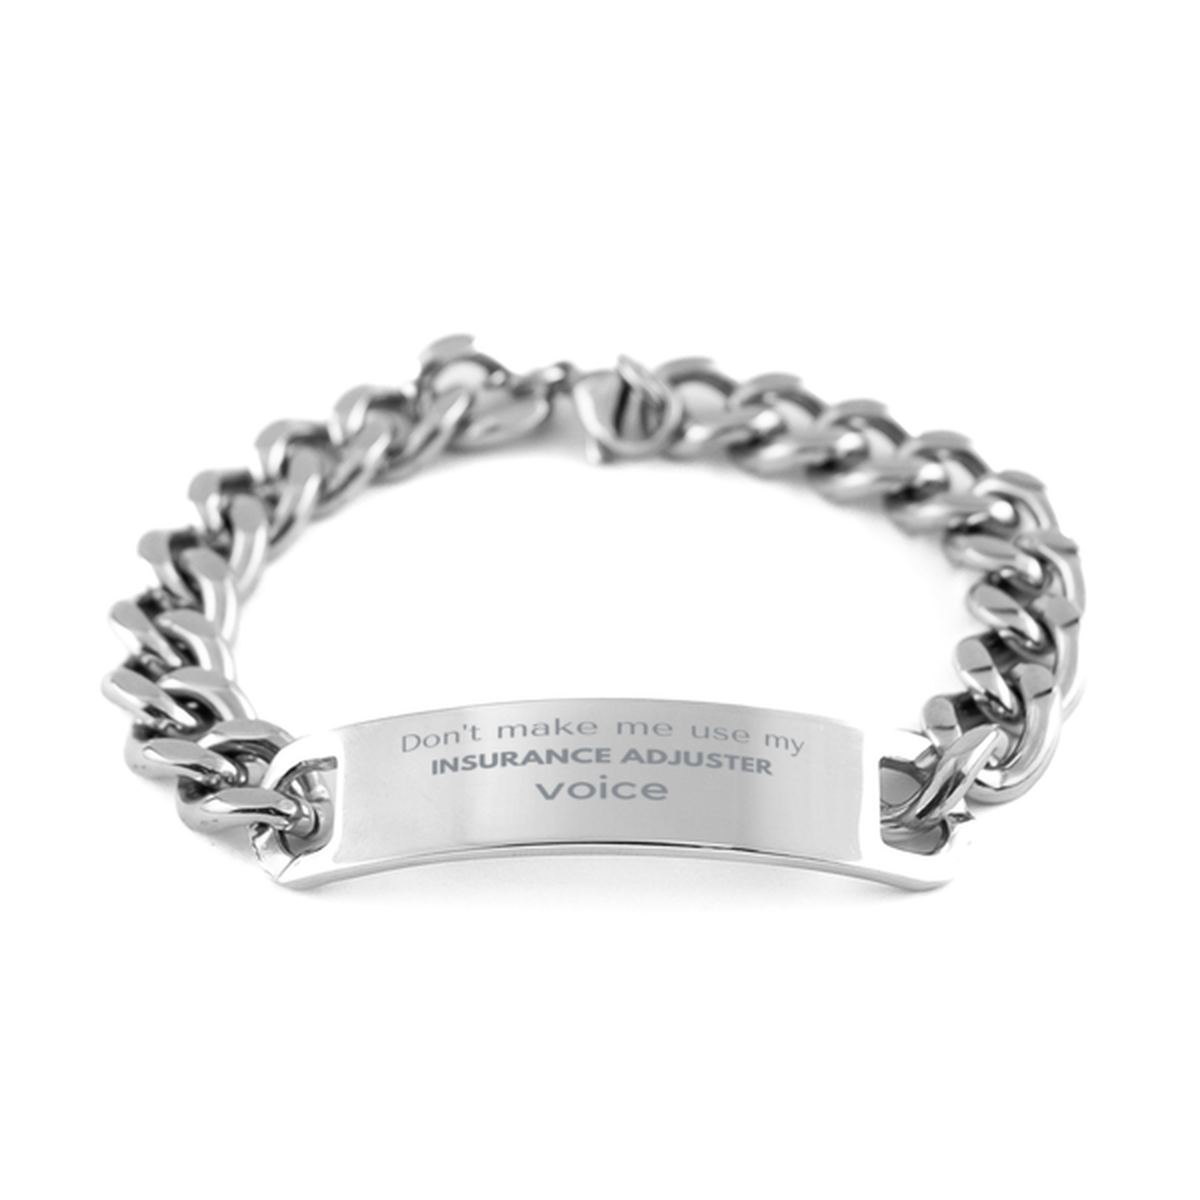 Don't make me use my Insurance Adjuster voice, Sarcasm Insurance Adjuster Gifts, Christmas Insurance Adjuster Cuban Chain Stainless Steel Bracelet Birthday Unique Gifts For Insurance Adjuster Coworkers, Men, Women, Colleague, Friends